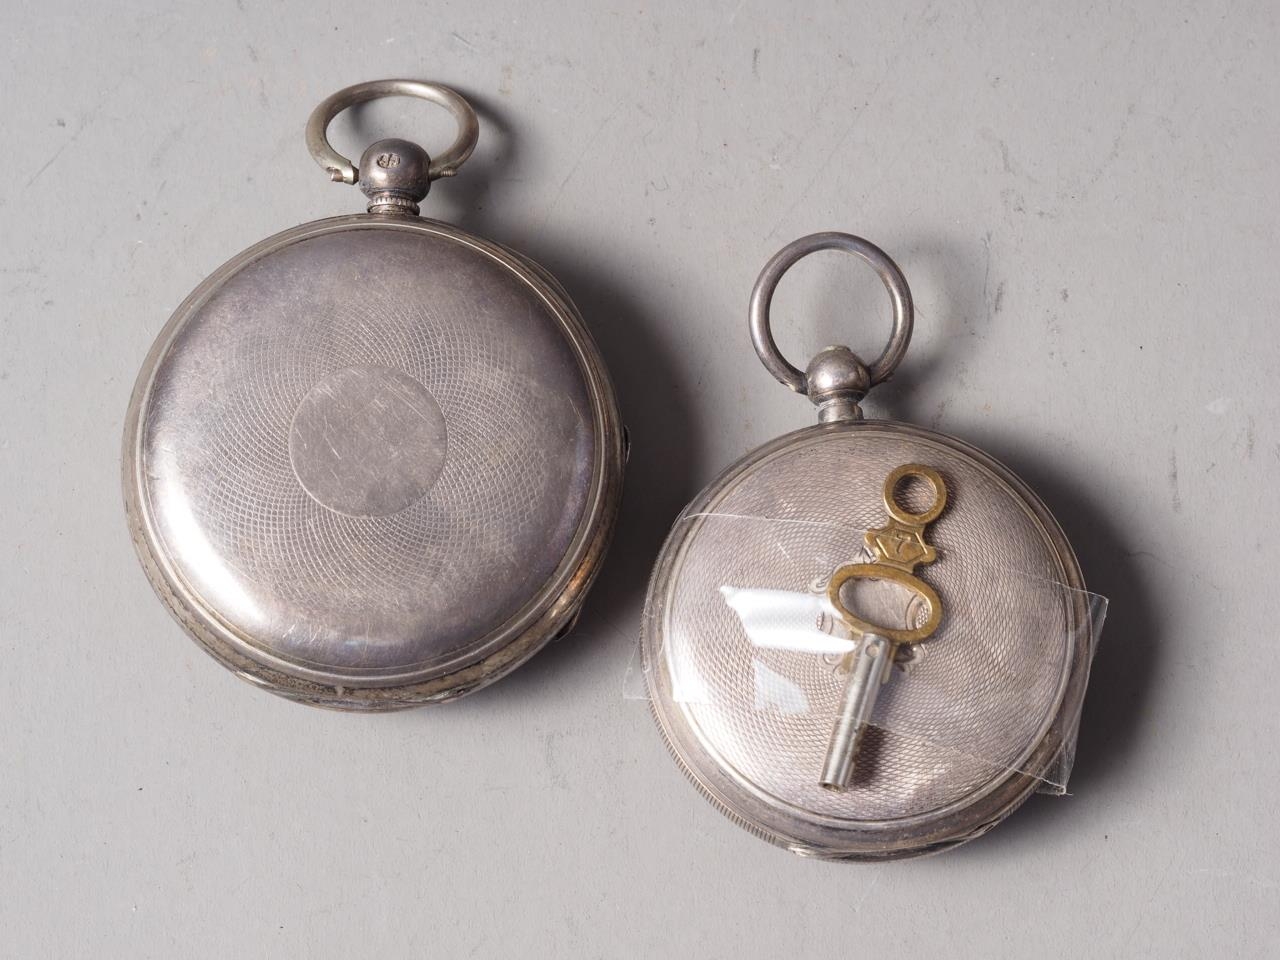 A silver cased open faced pocket watch with silvered dial and Roman numerals, and another similar - Image 2 of 2